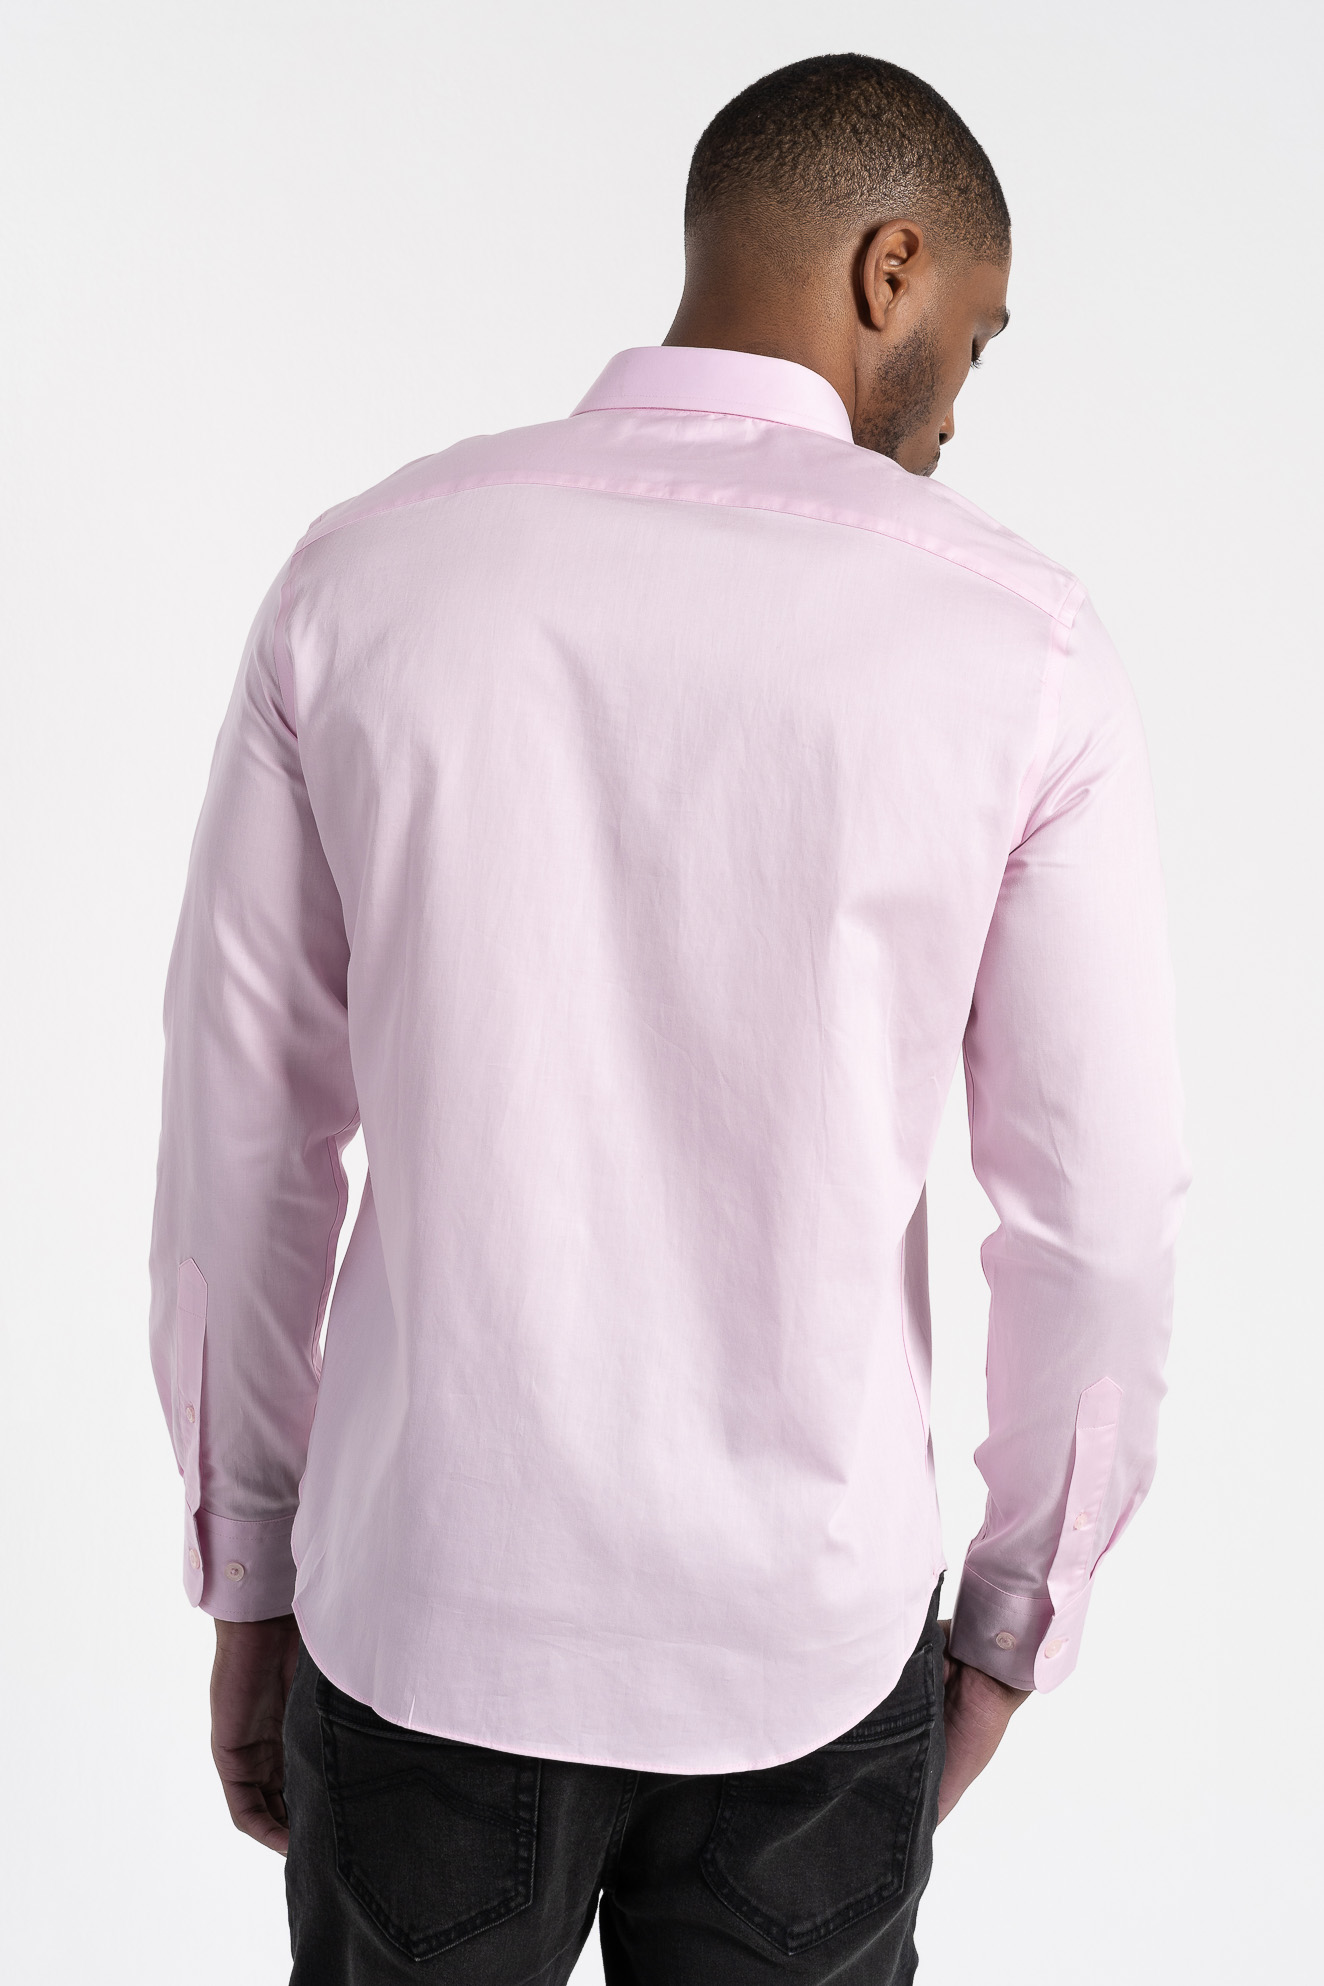 Pringle Michael L/S tailored shirt - Frontierco